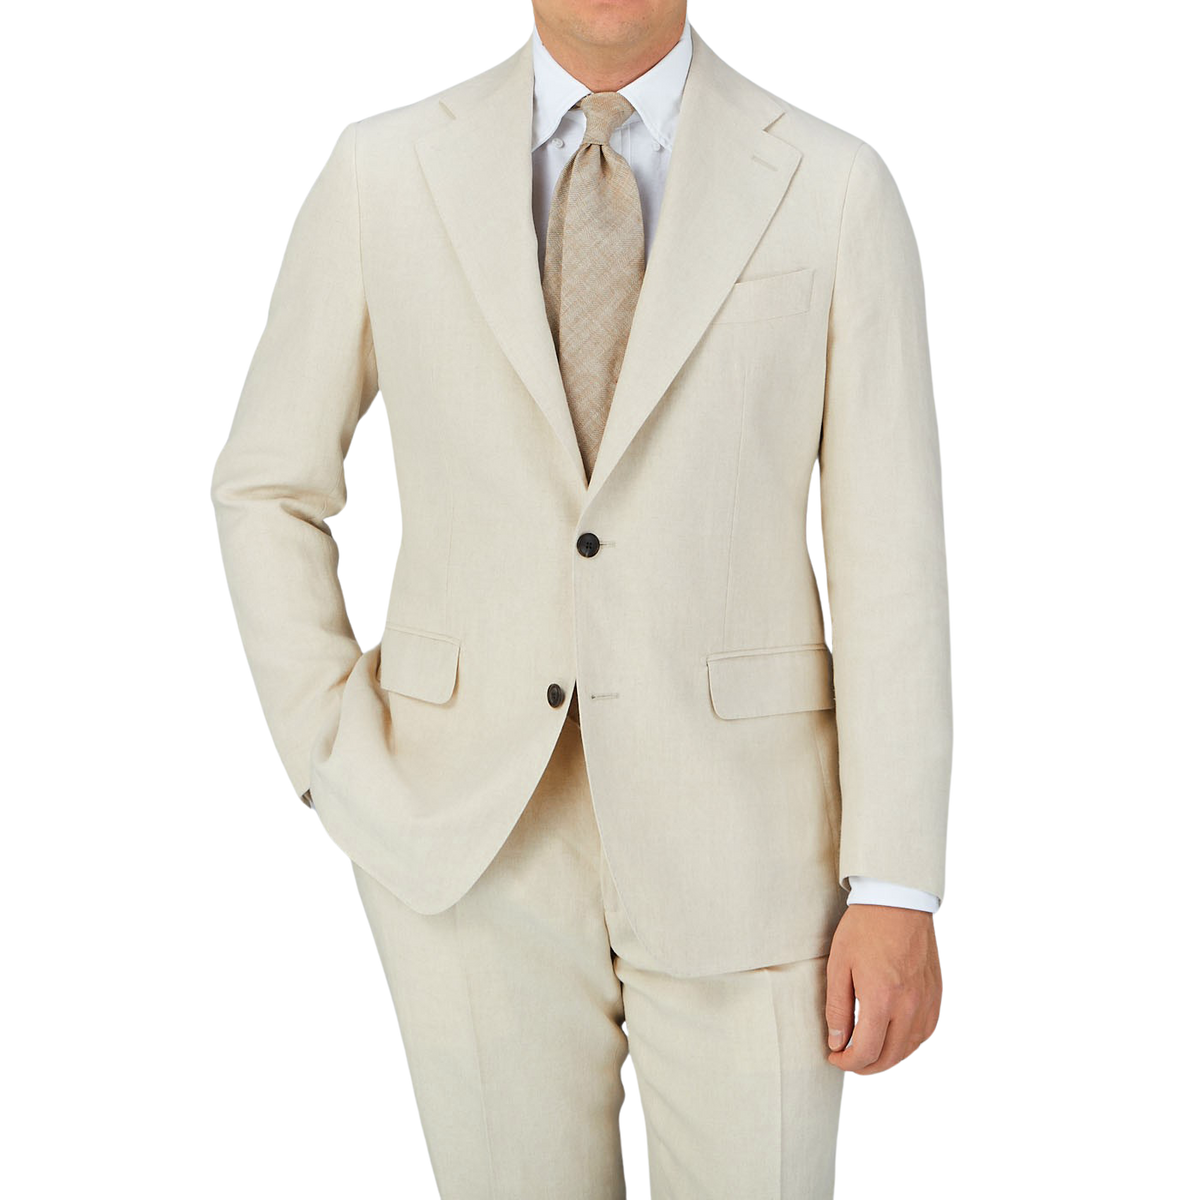 A man is posing in a Light Beige Pure Linen Suit Jacket by Baltzar Sartorial, consisting of a suit jacket and tailored trousers.